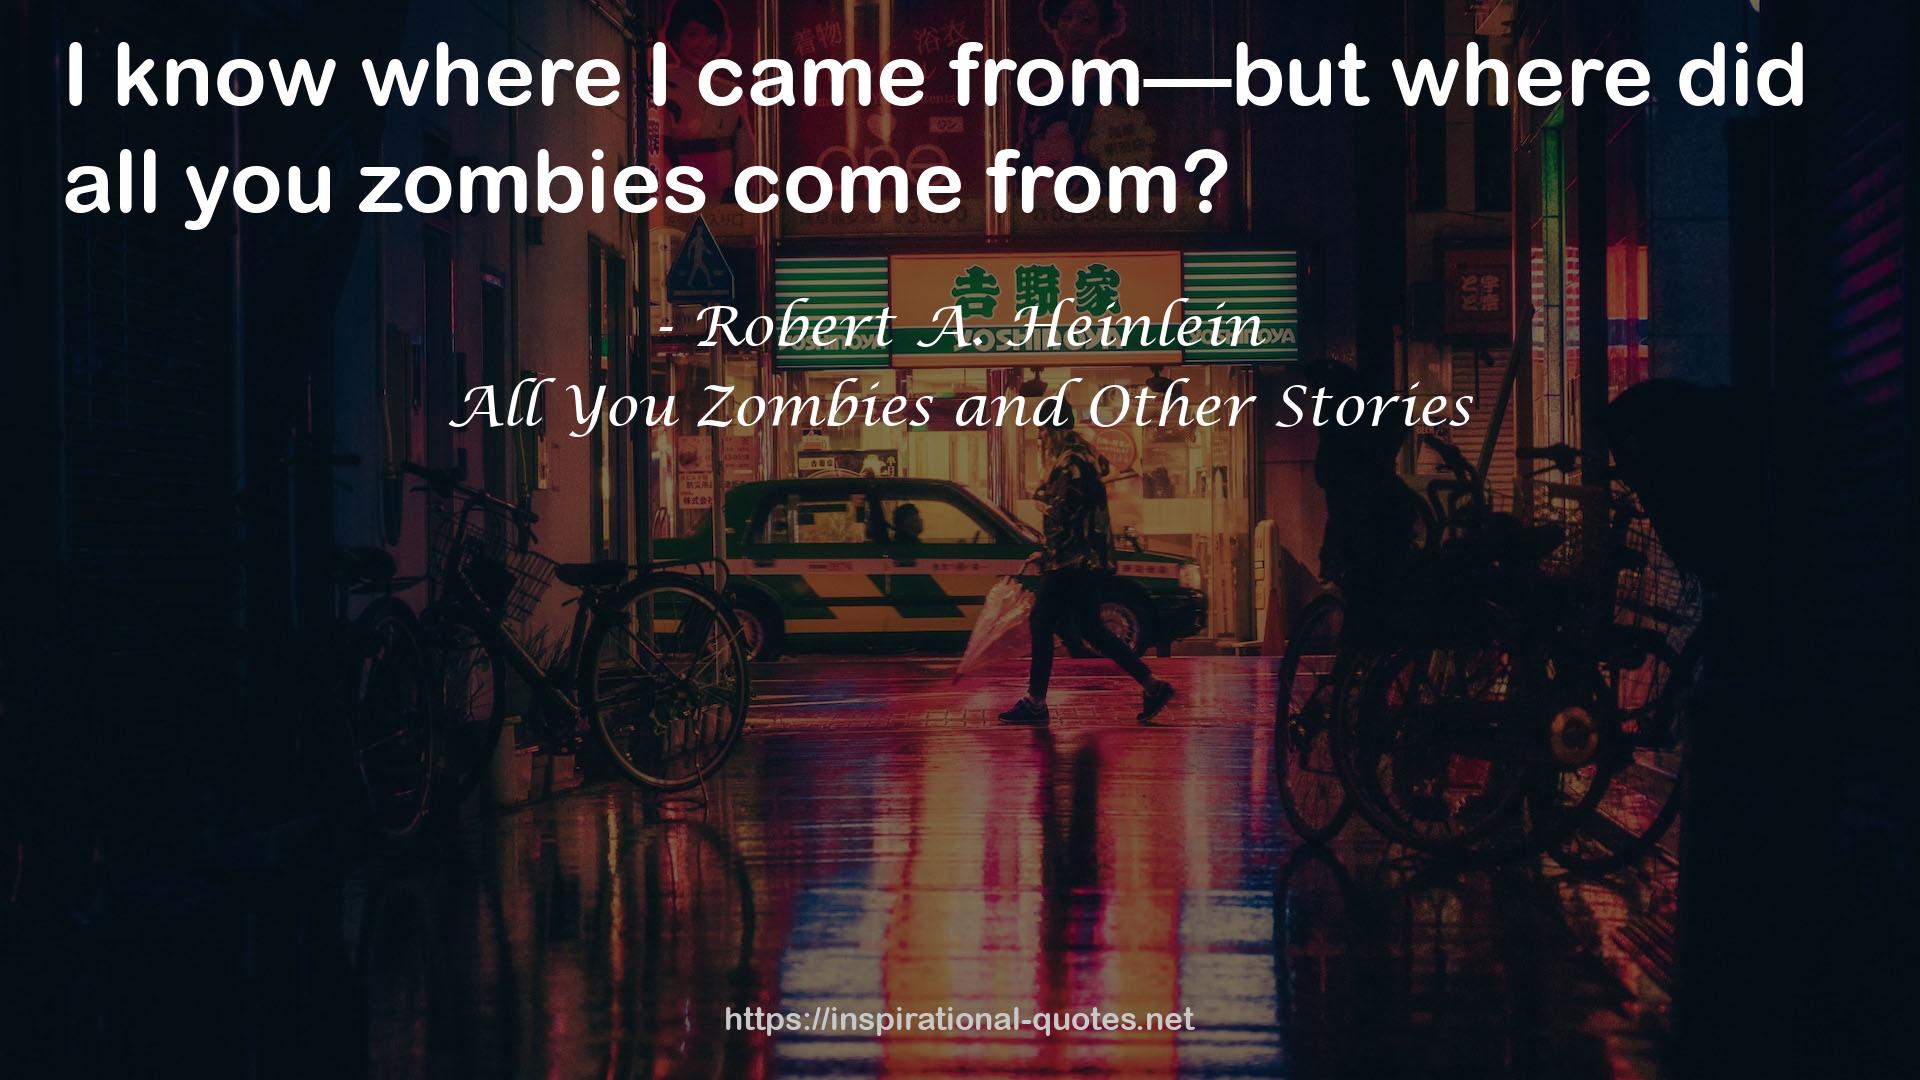 All You Zombies and Other Stories QUOTES